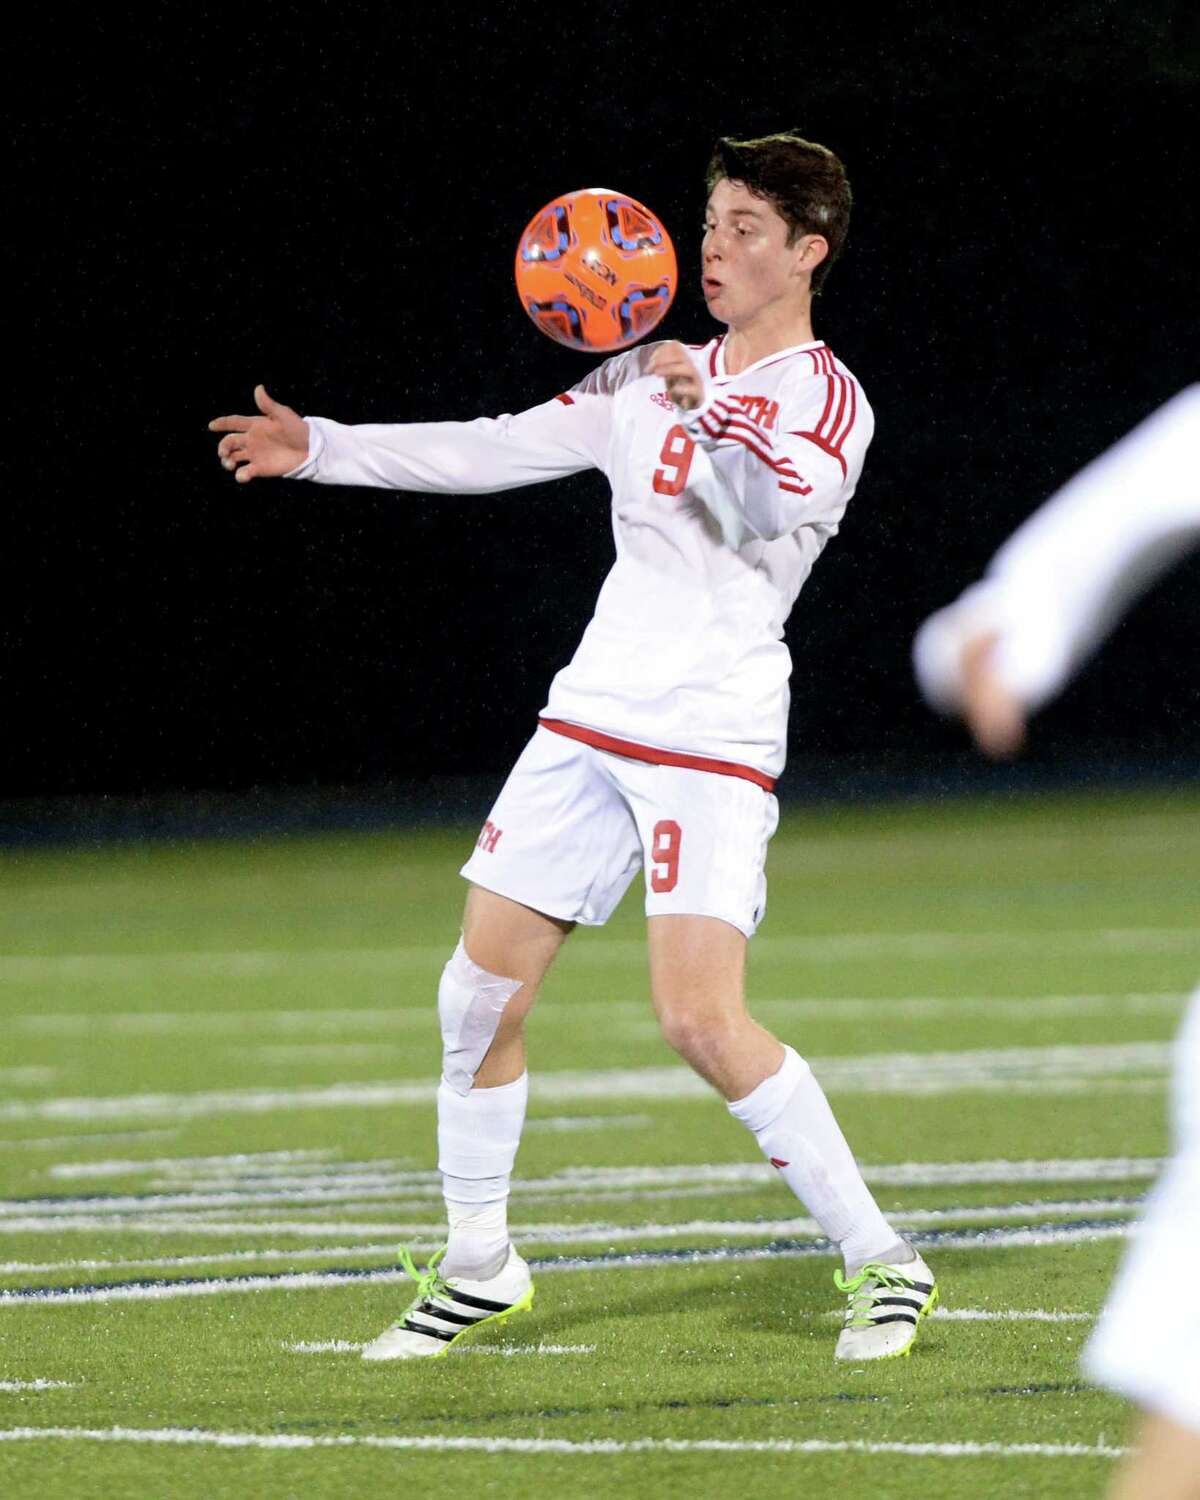 Alessandro Rivero (9) of St. Thomas traps a ball during the first half of the TAPPS Division I State Semi-Final soccer game between the St. Thomas Eagles and the St. Pius X Panthers on Wednesday, February 21, 2018 at Emery/Weiner School, Houston, TX.